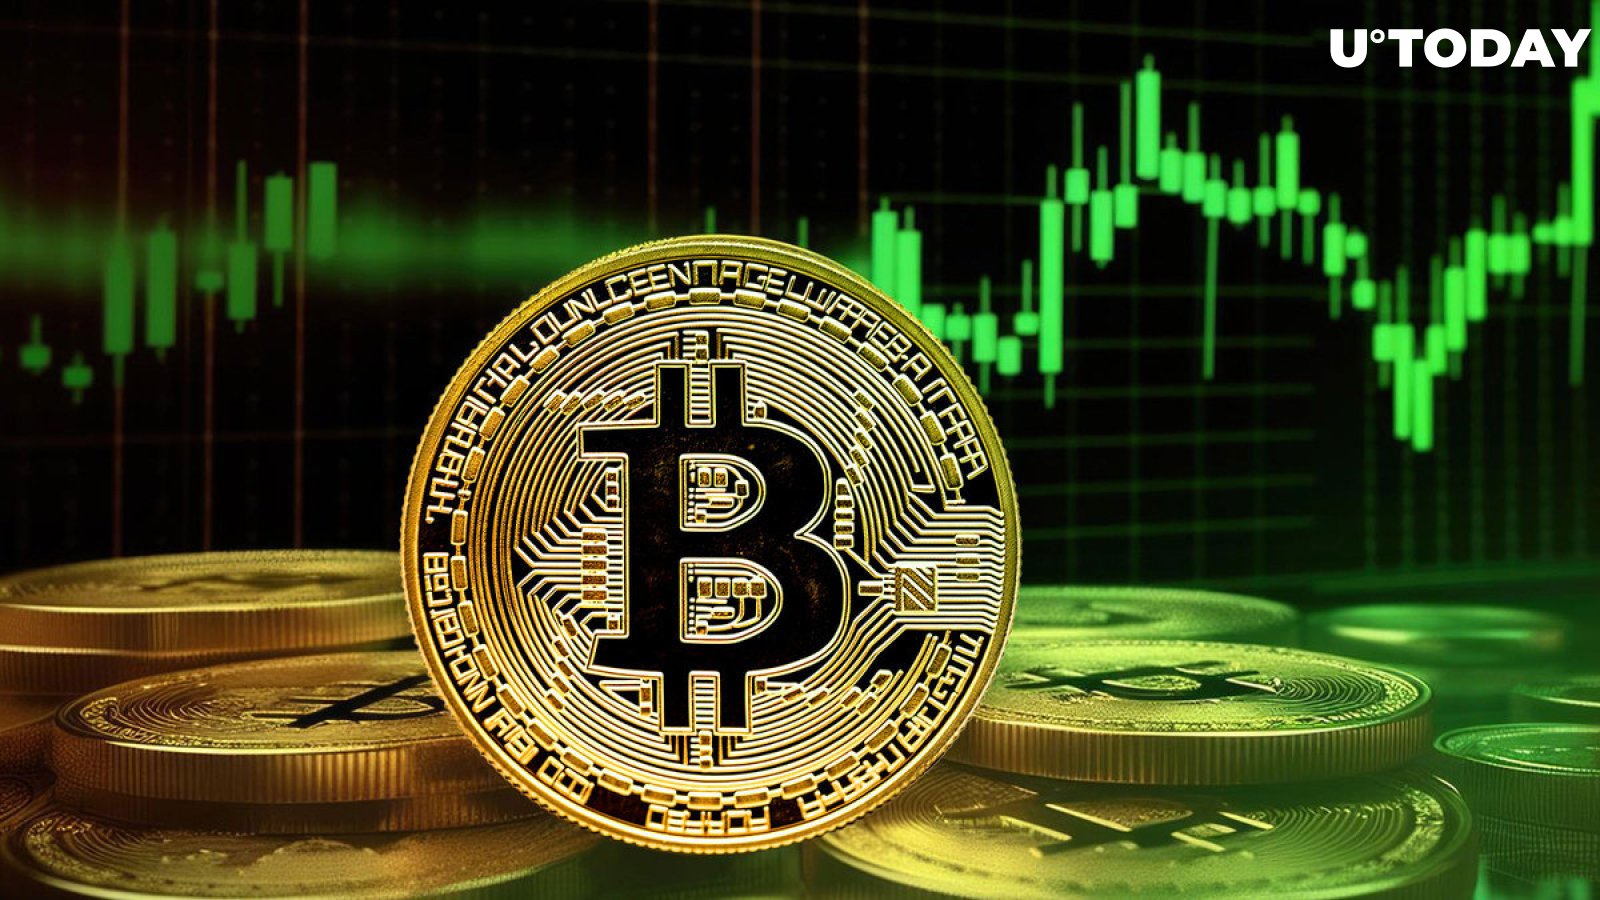 Bitcoin Price Likely to Test $47,000-$50,000 for This Key Reason: Top Analyst